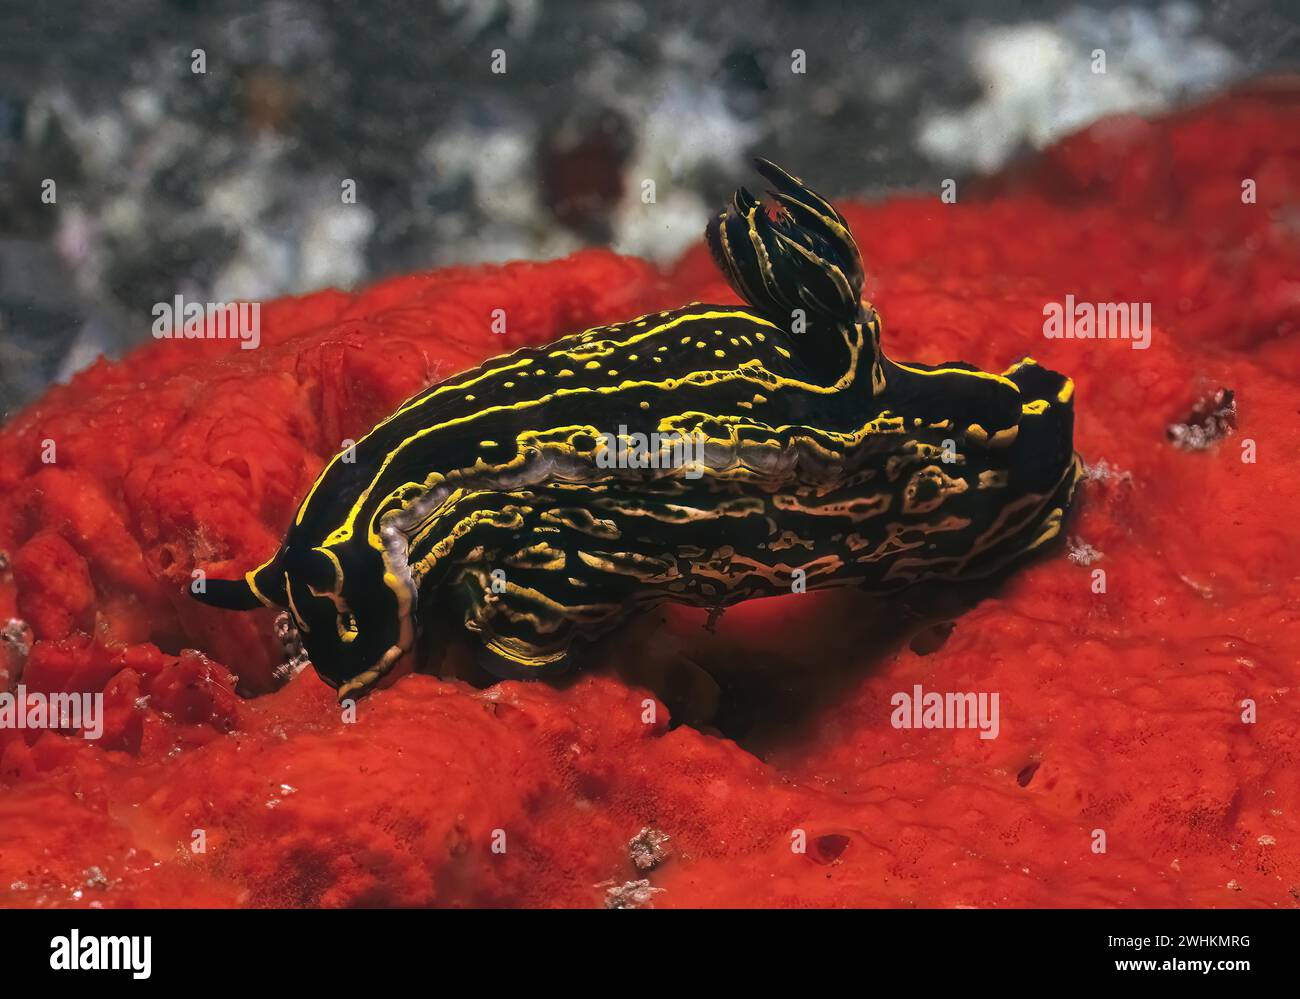 Magnificent star snail (Felimare picta) (formerly genus Hypselodoris) Nudibranch Aftergill crawls over eats red crustose sponge (Crambe crambe) Stock Photo